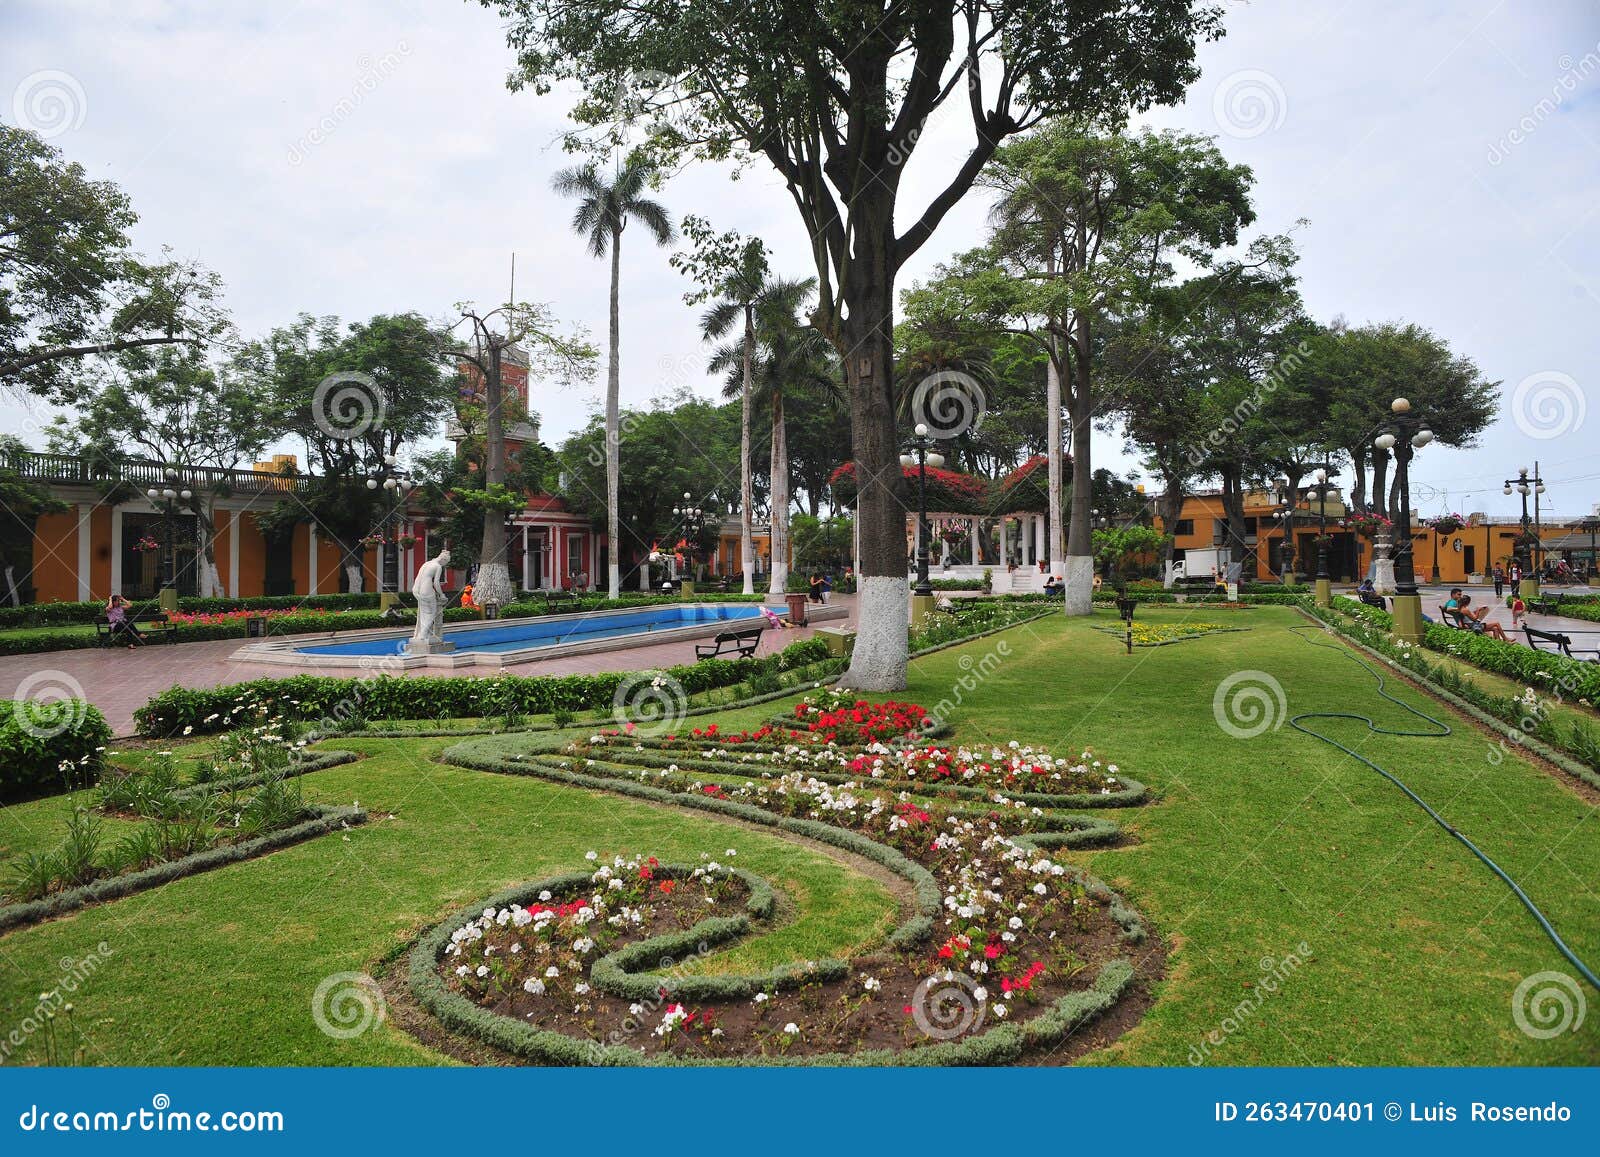 barranco lima-garden and flower square background arquitecture and building